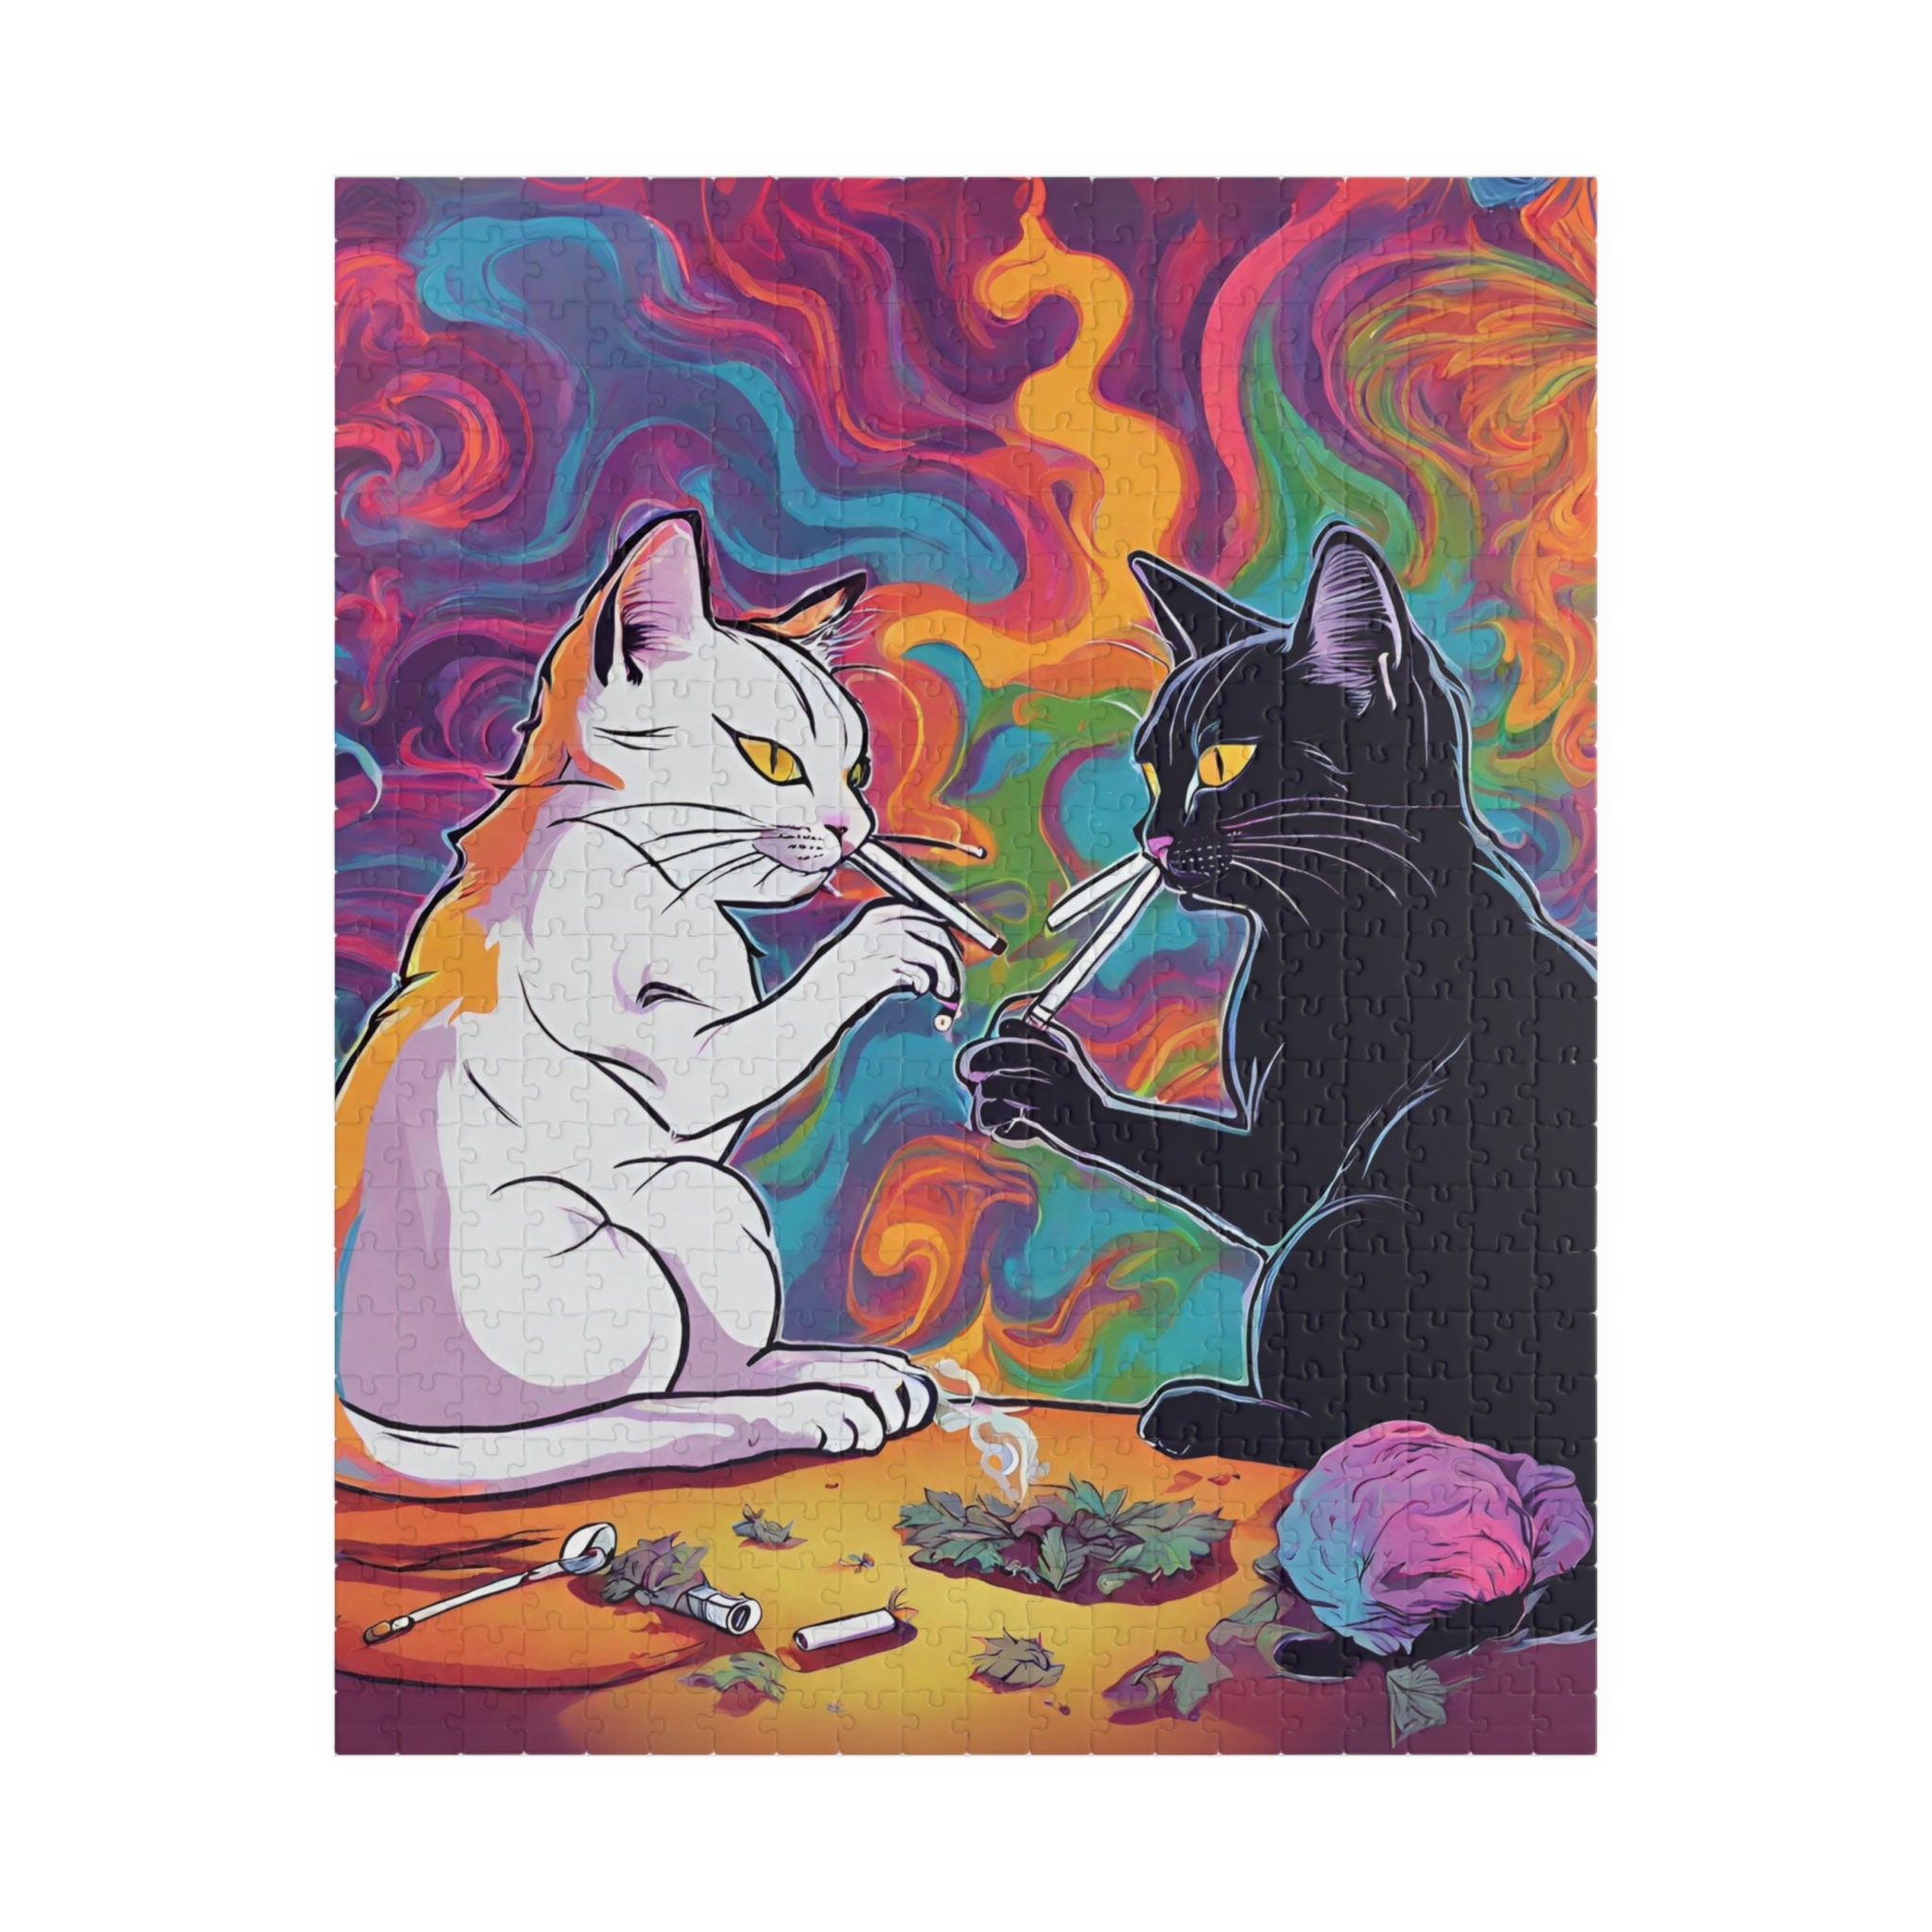 Cannabis Cat Vinyl Sticker - Cool Cat Stickers for Weed Smokers